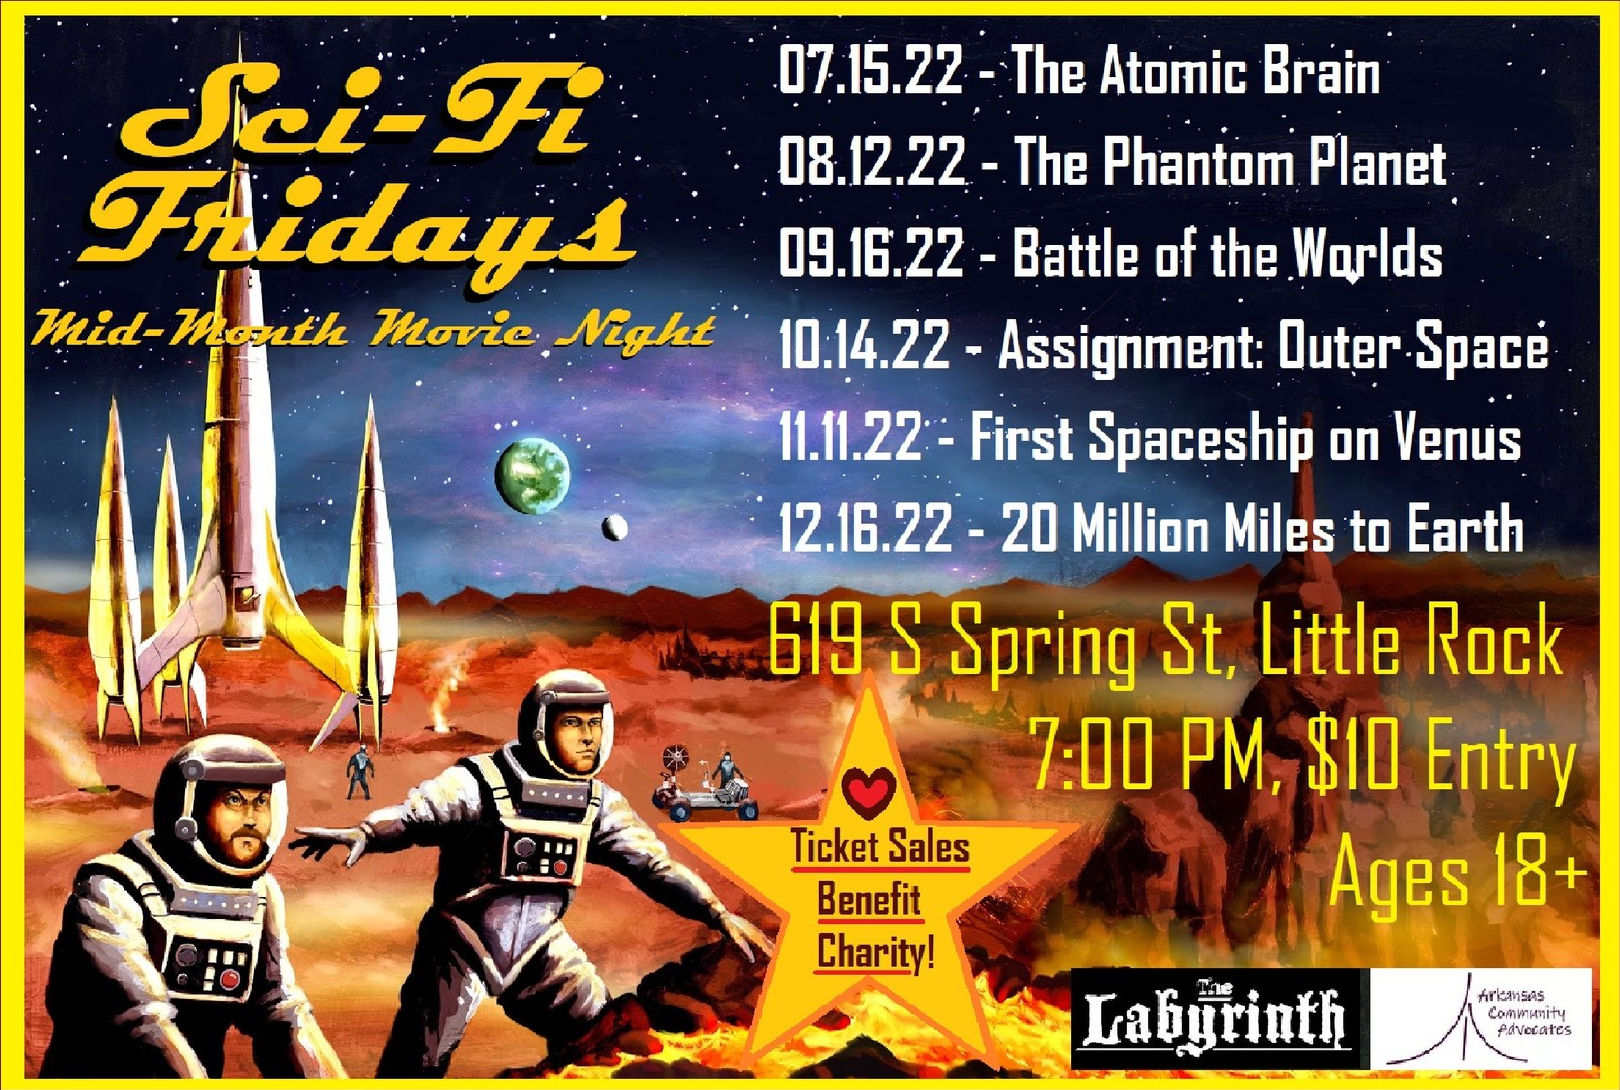 Flyer For Sci-Fi Fridays at the Labyrinth. It shows pictures of astronauts in spacesuits on an alien planet. The text says &lsquo;Sci-Fi Fridays. Mid-Month Movie Night.&rsquo; November 11, 2022. First Spaceship on Venus. 7:00 PM, $10 at the door, at The Labyrinth, 619 South Spring Street in downtown Little Rock.